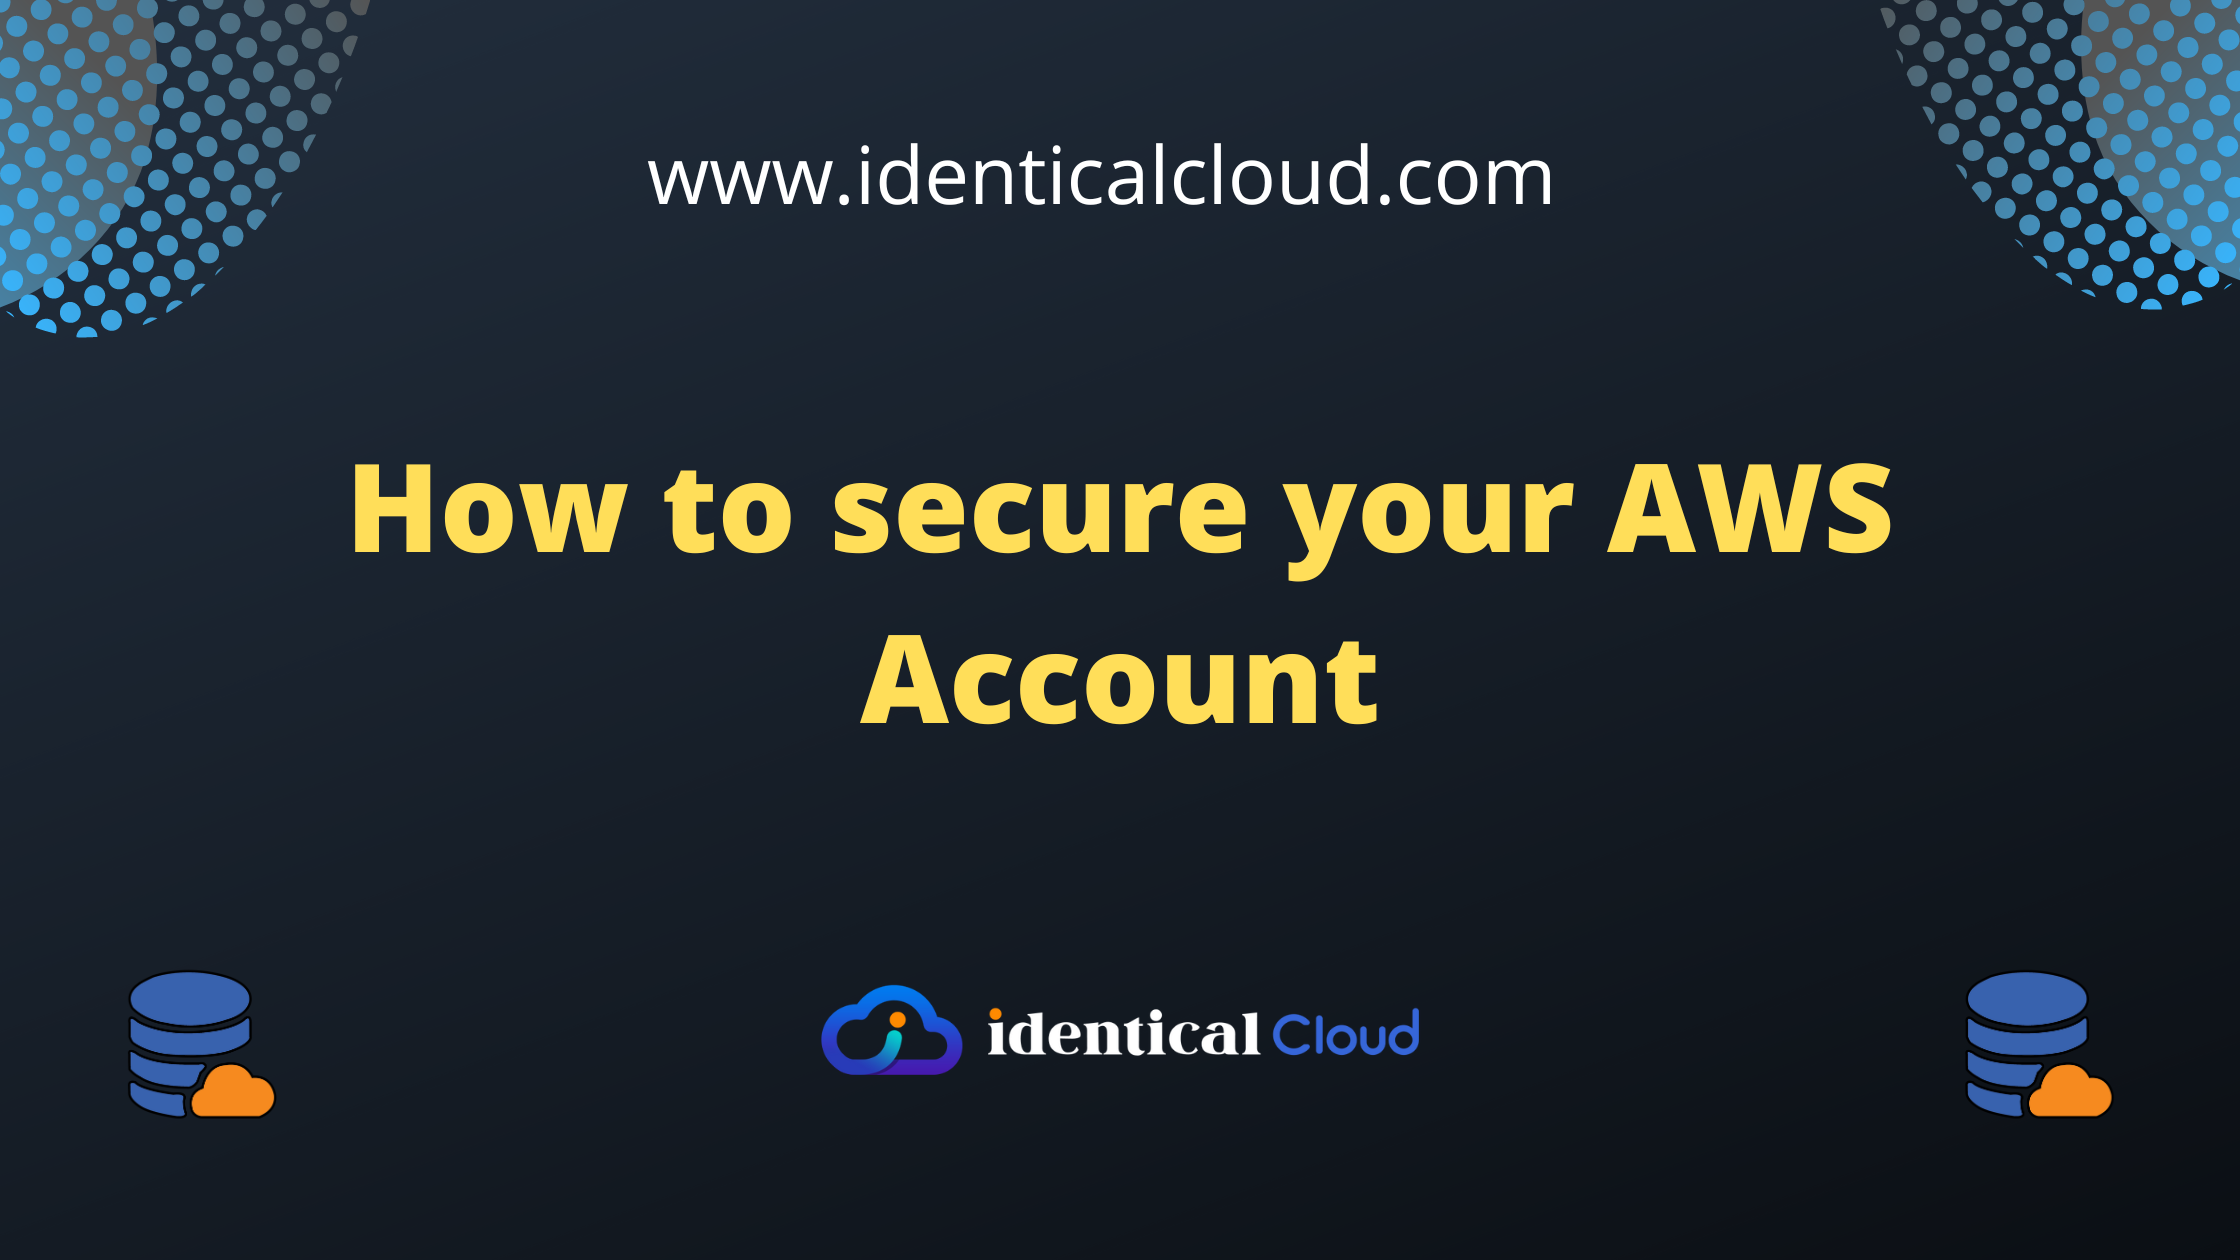 How to secure your AWS Account - identicalcloud.com